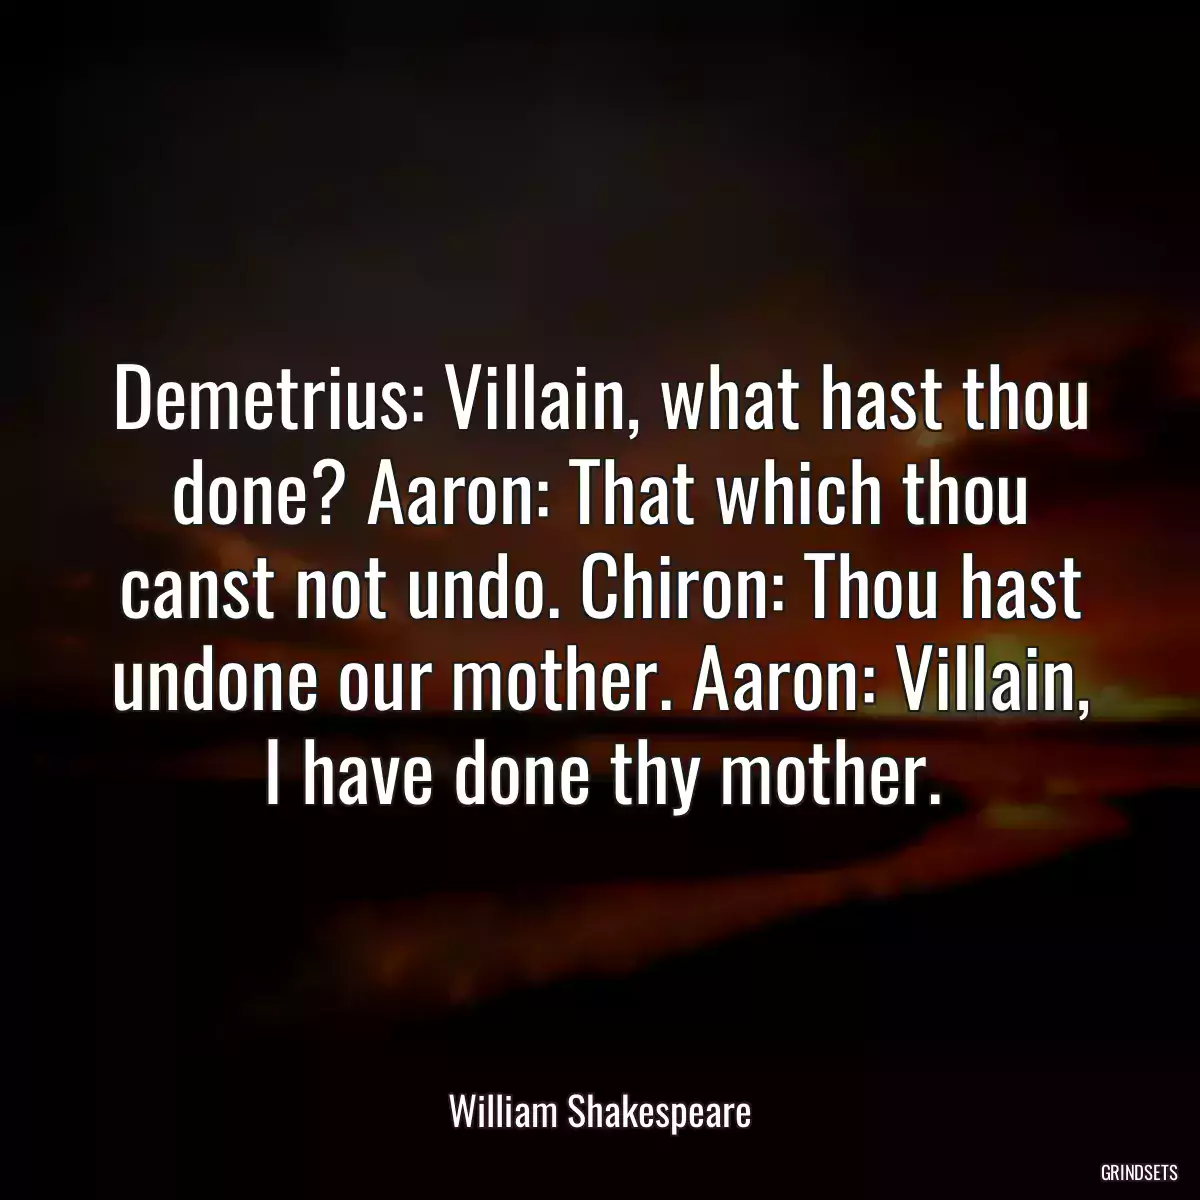 Demetrius: Villain, what hast thou done? Aaron: That which thou canst not undo. Chiron: Thou hast undone our mother. Aaron: Villain, I have done thy mother.